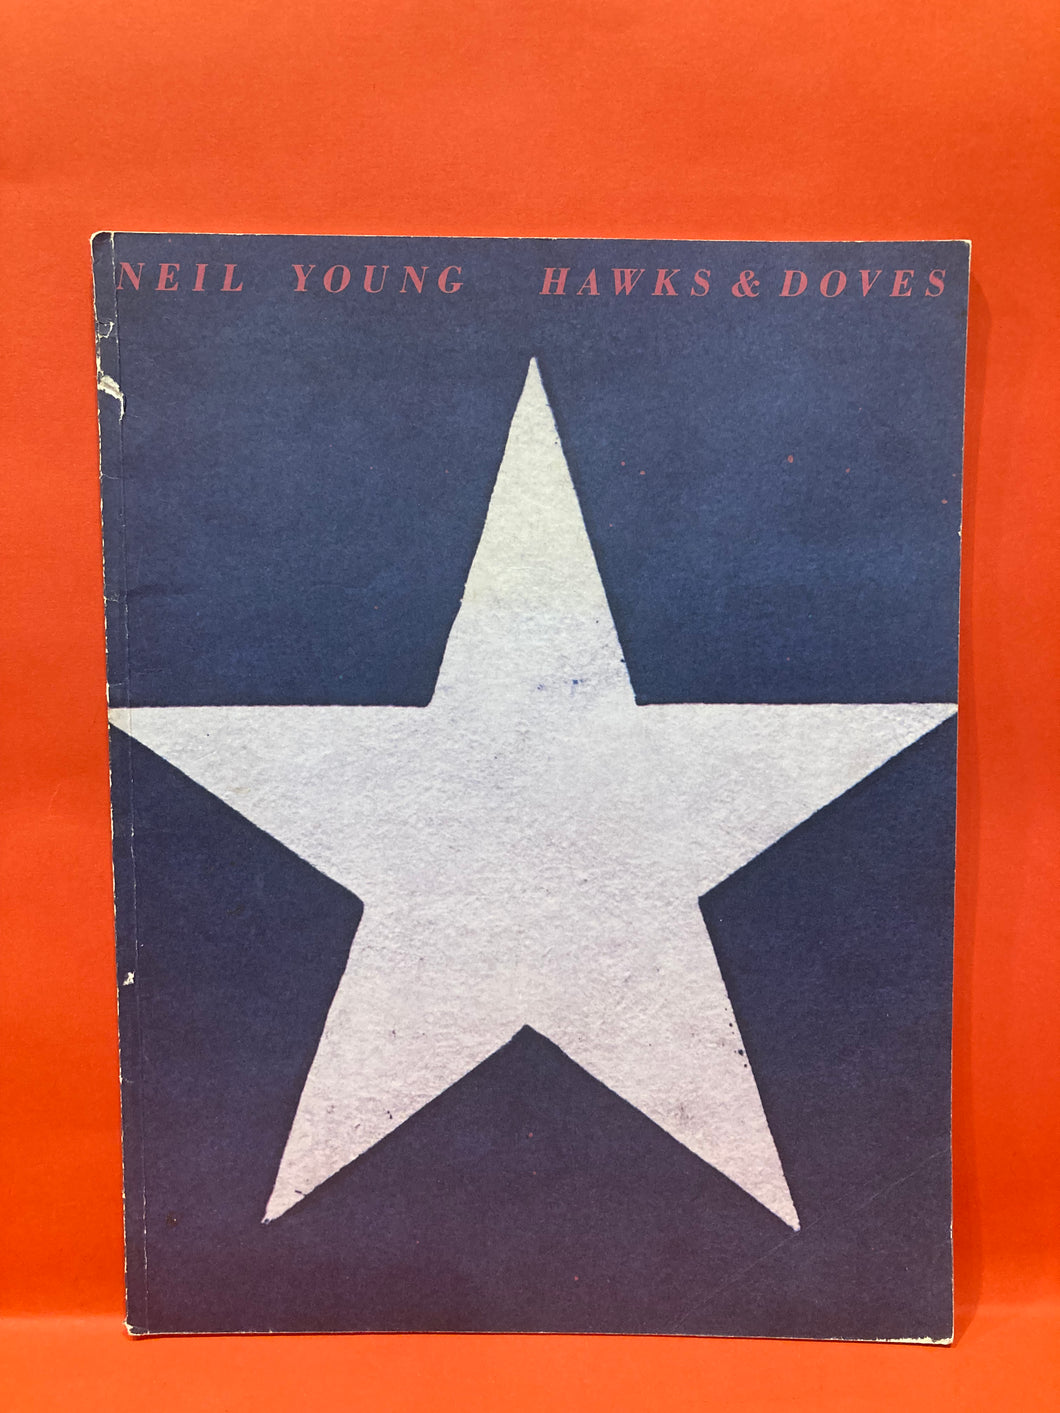 NEIL YOUNG - HAWKS & DOVES - SHEET MUSIC SONGBOOK